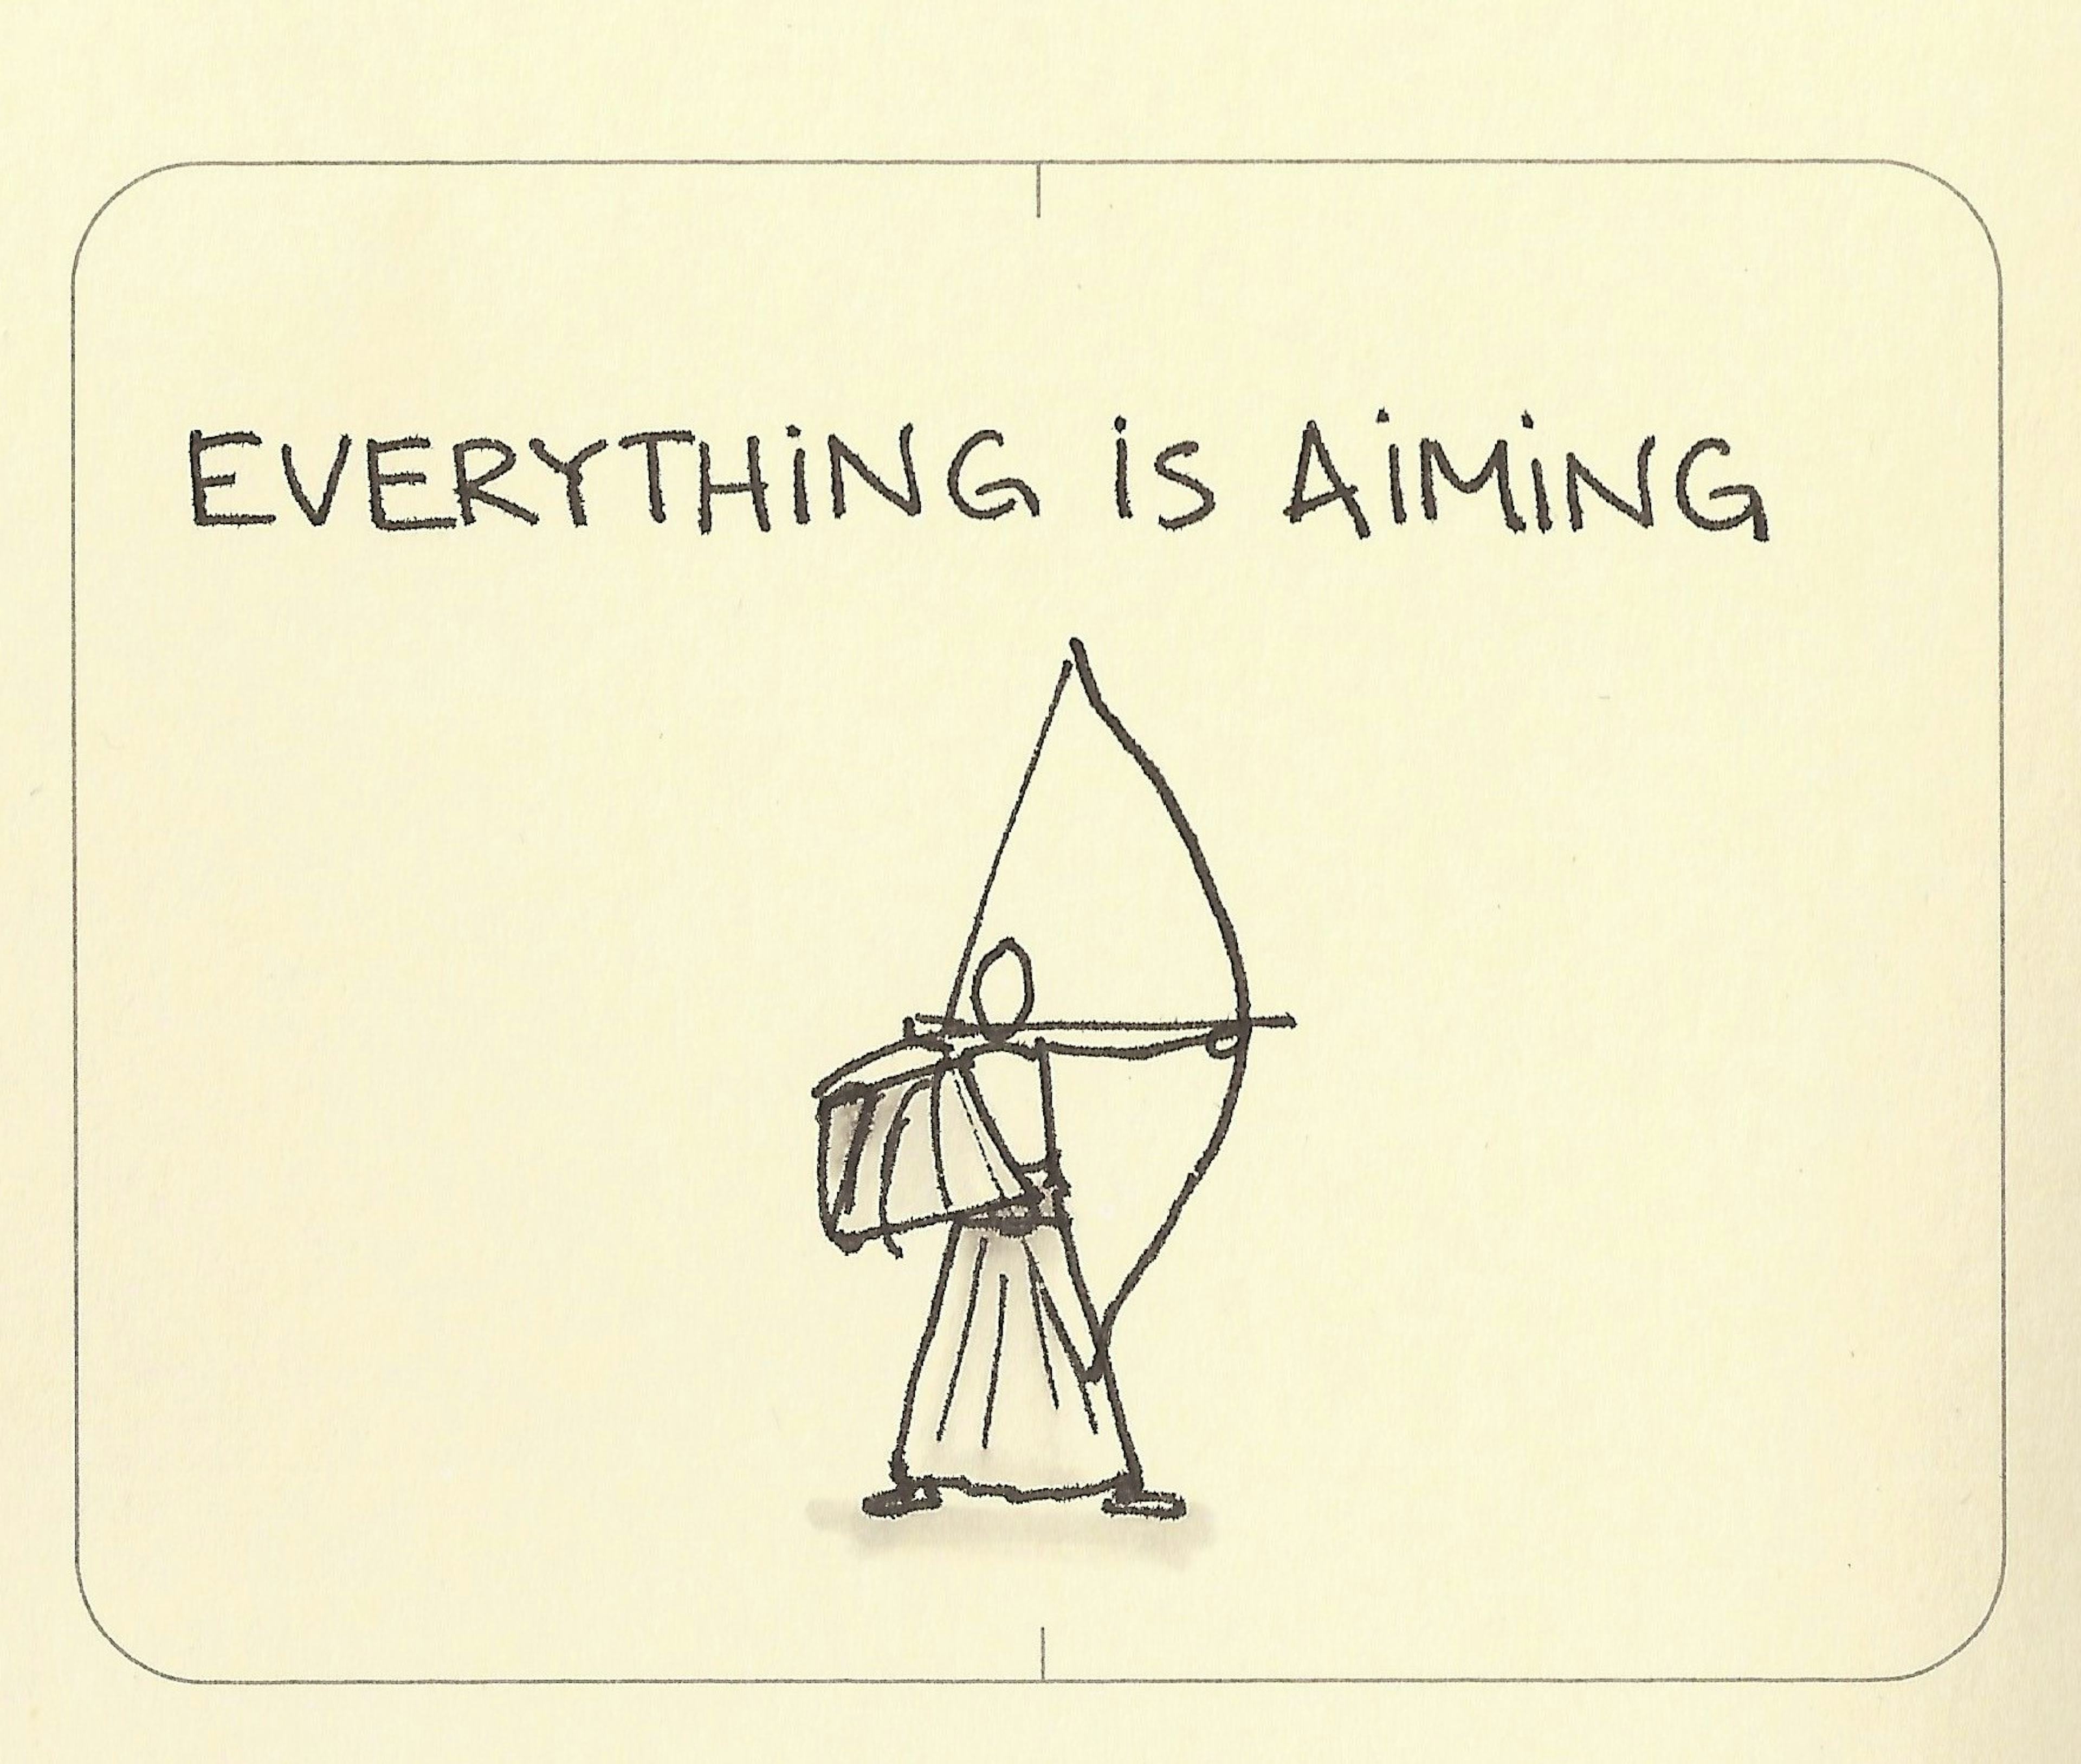 Everything is aiming - Sketchplanations